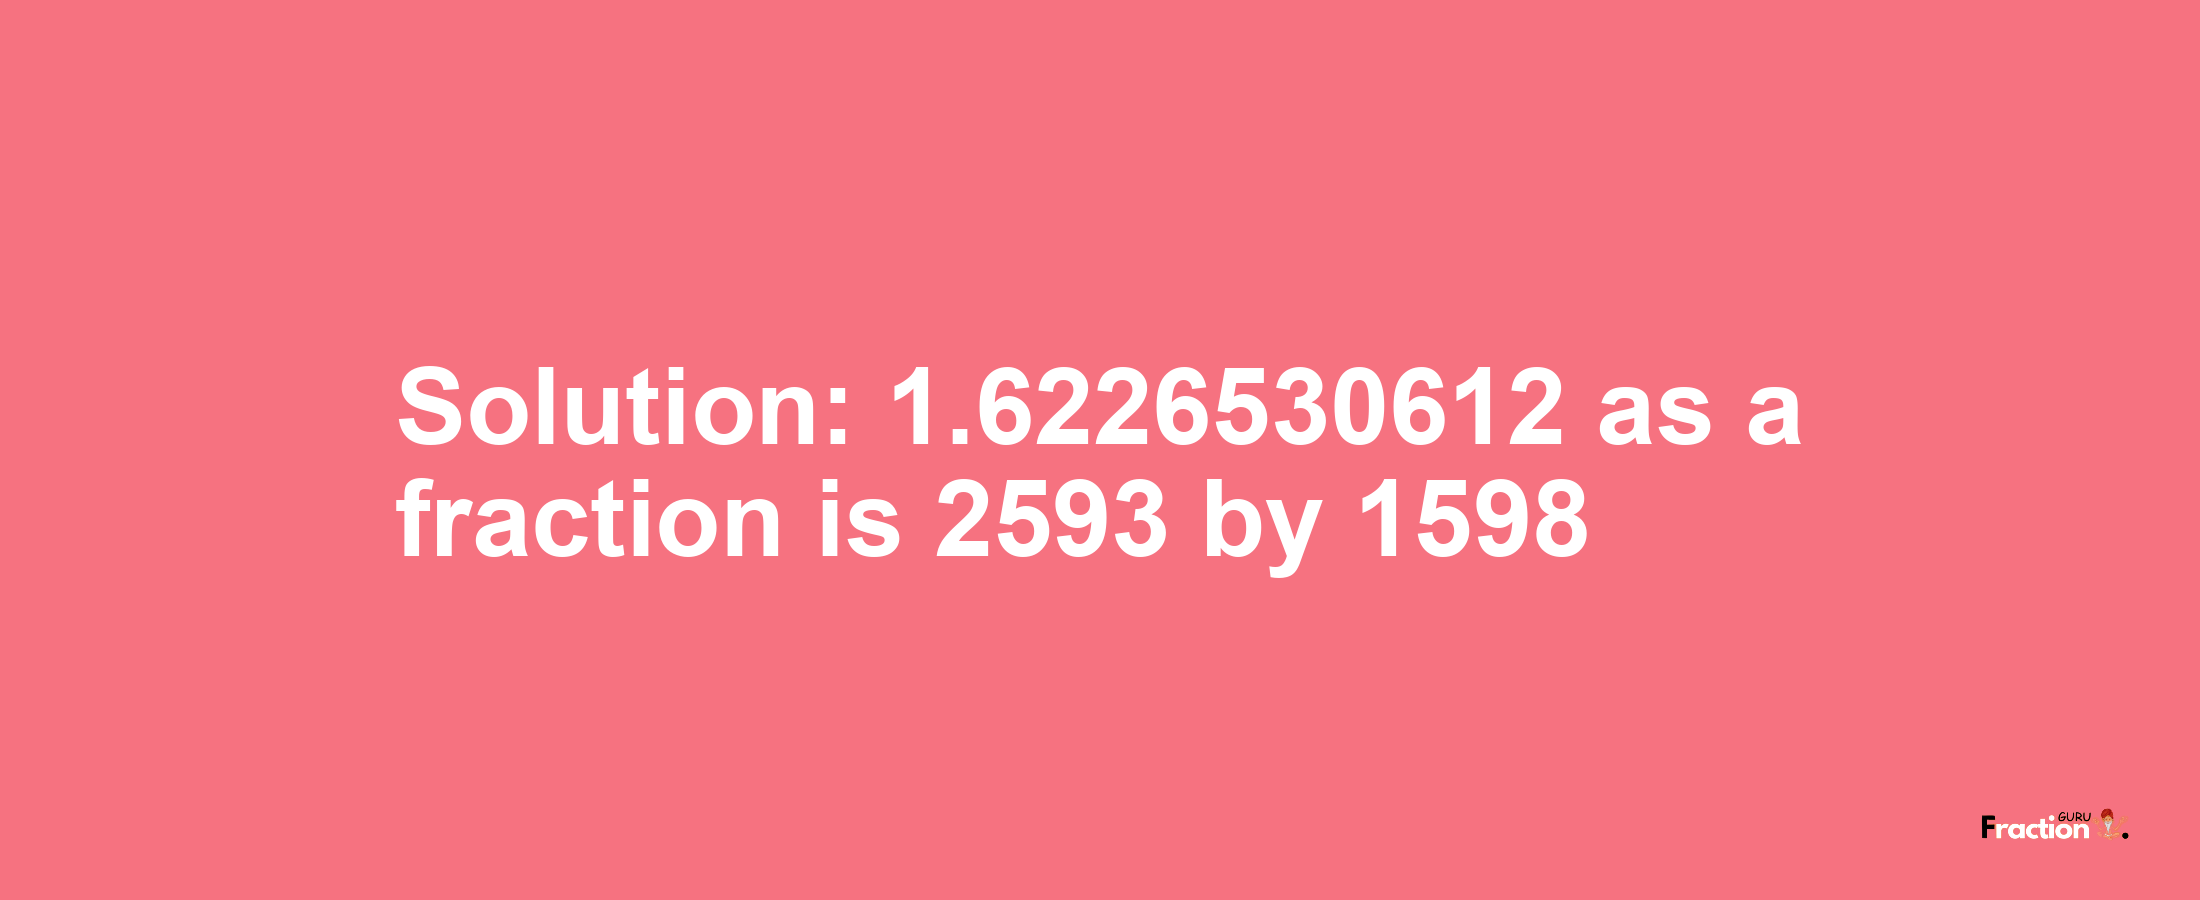 Solution:1.6226530612 as a fraction is 2593/1598